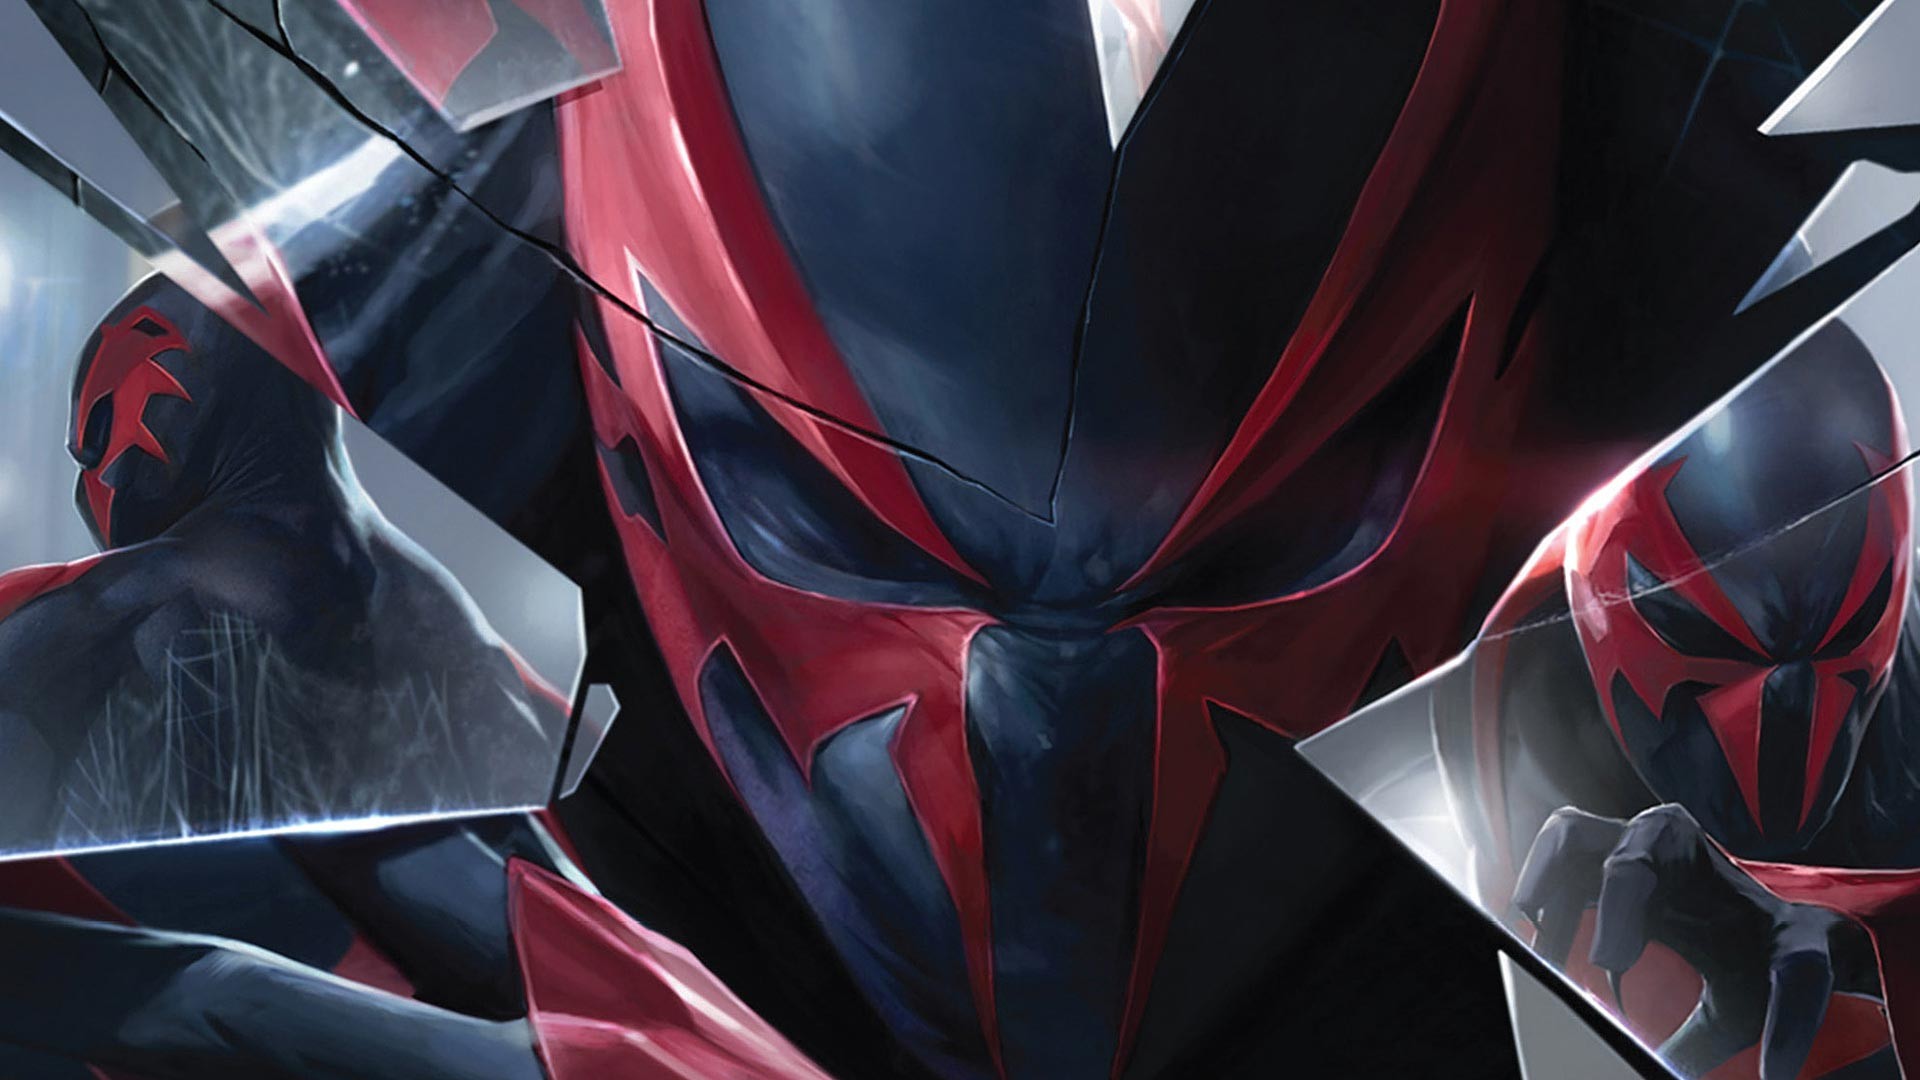 Spider man 2099 wallpaper wallpapers browse